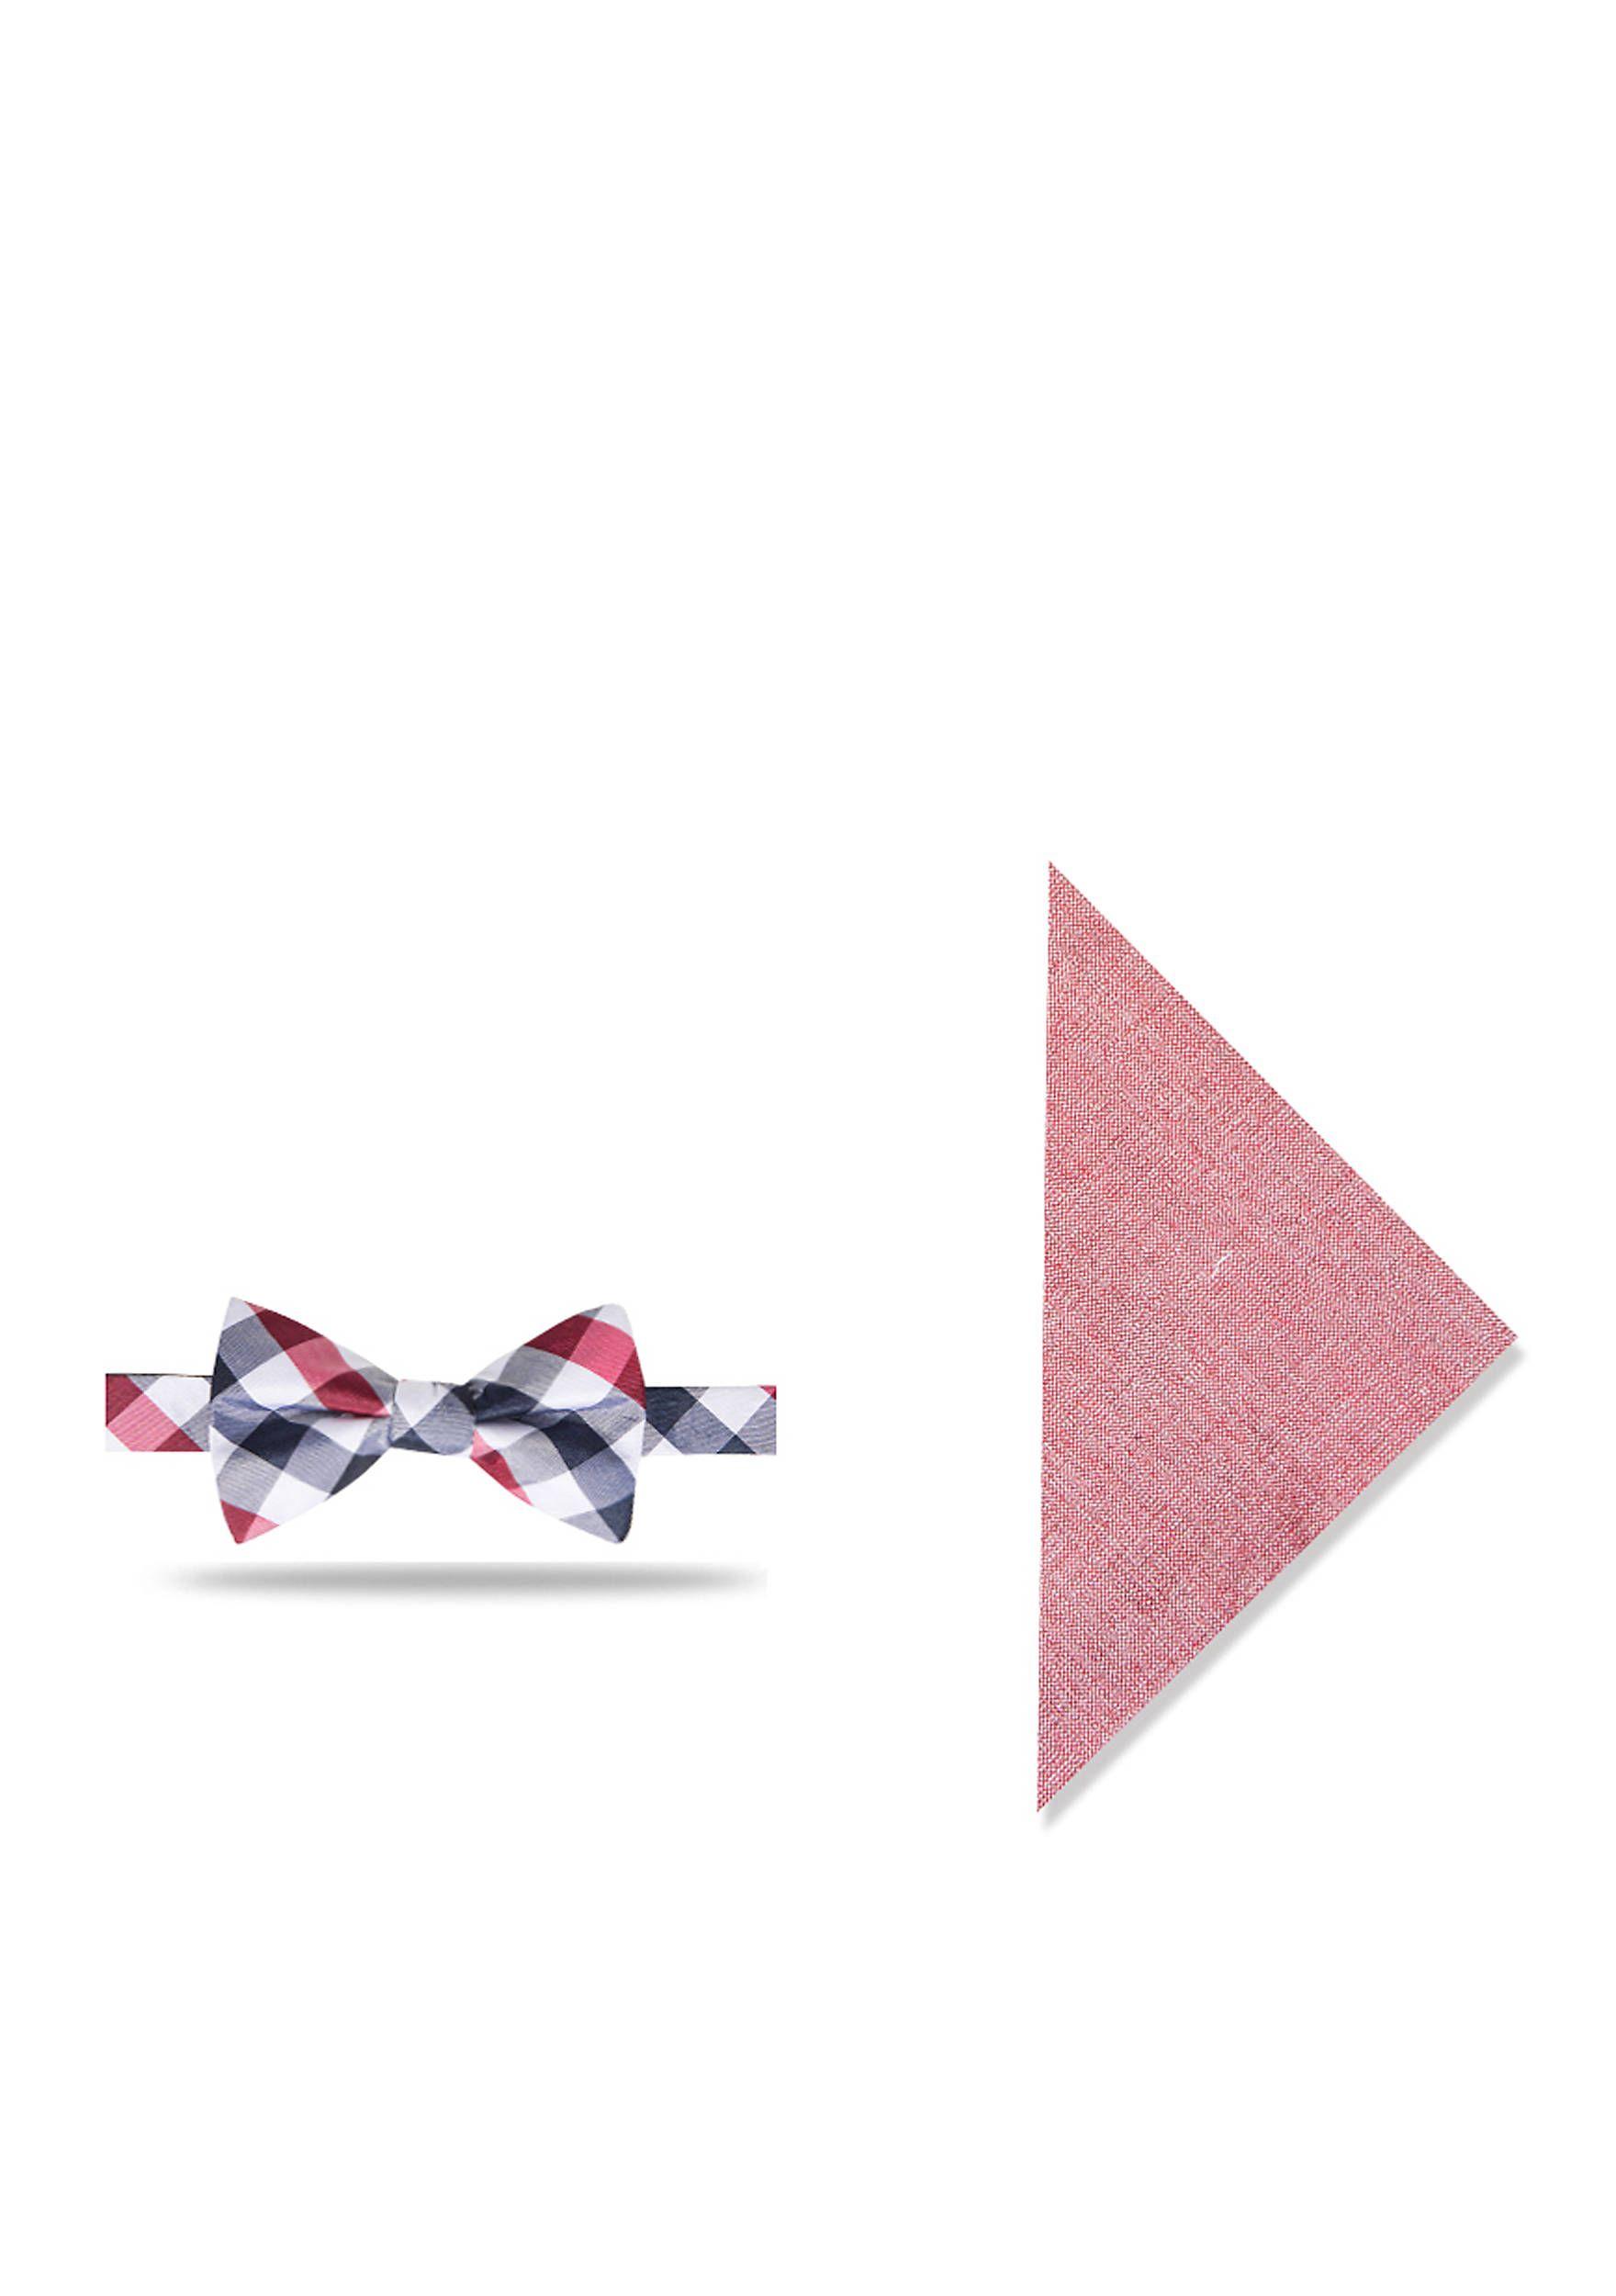 The Square Red Crown Logo - Crown & Ivy™ Catalina Gingham Set Bow Tie And Pocket Square Red ...